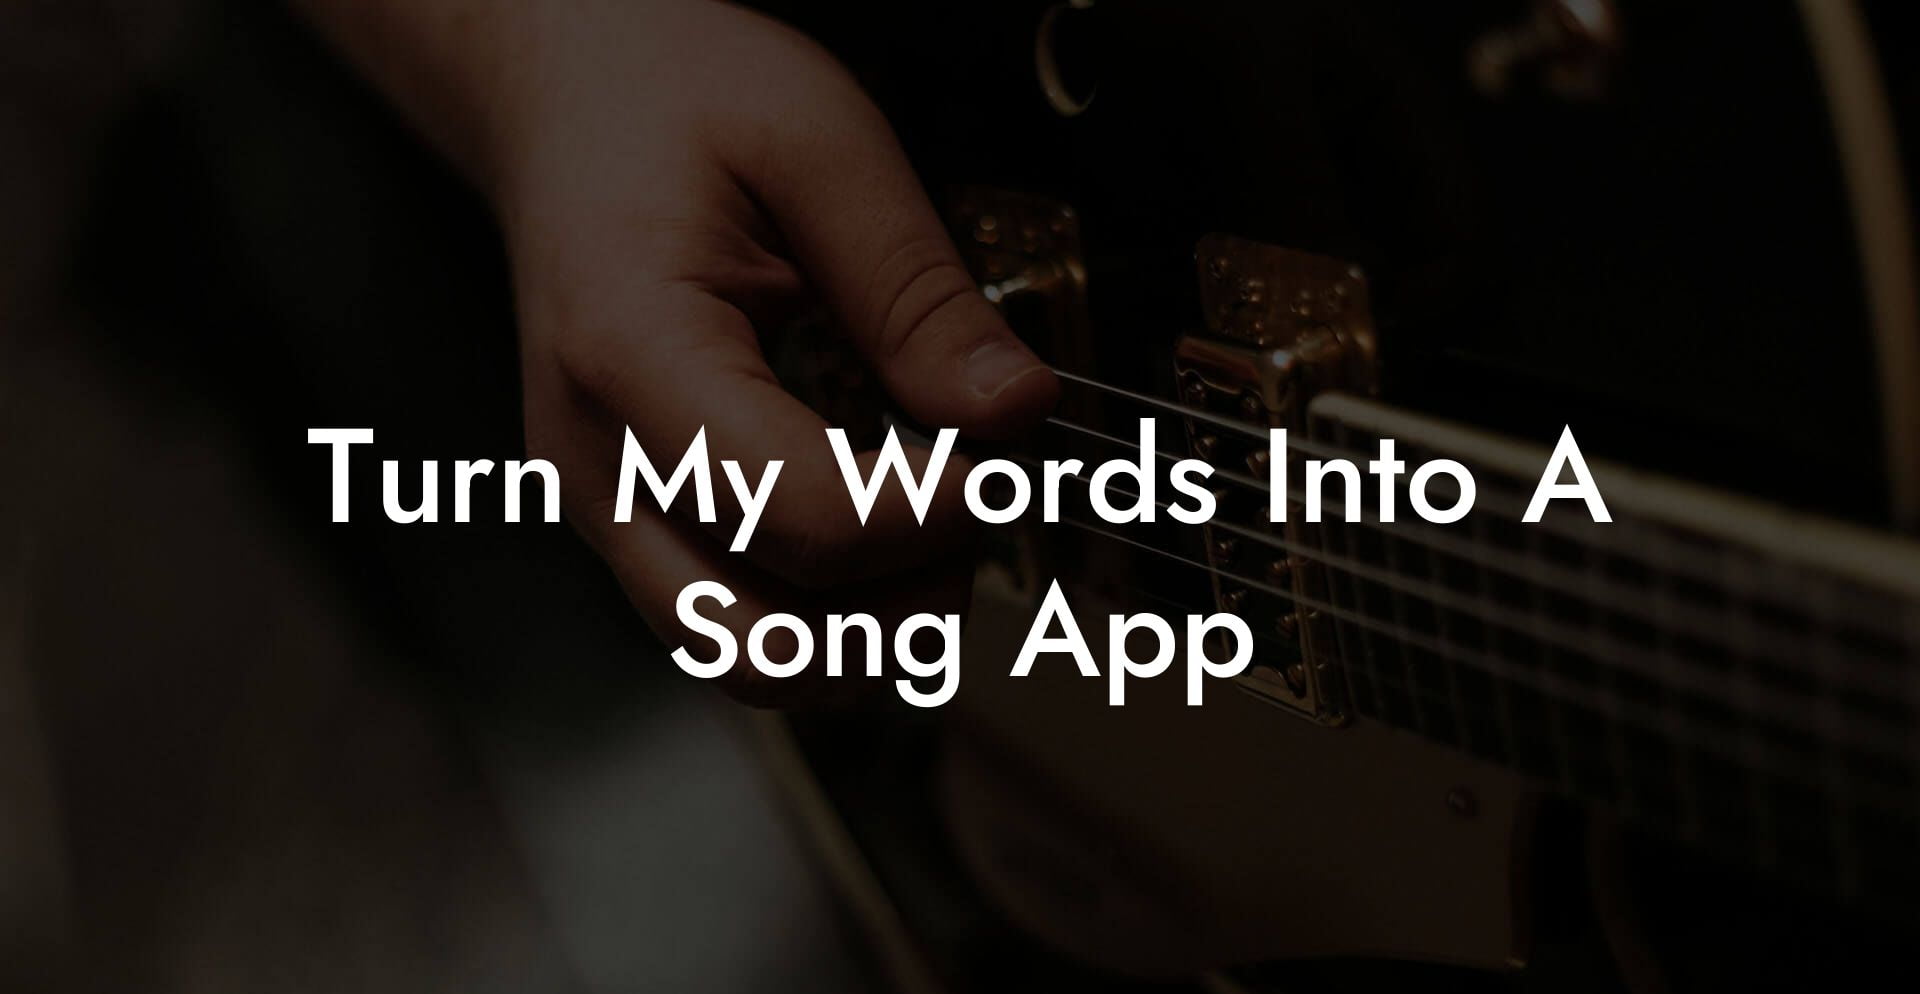 turn my words into a song app lyric assistant